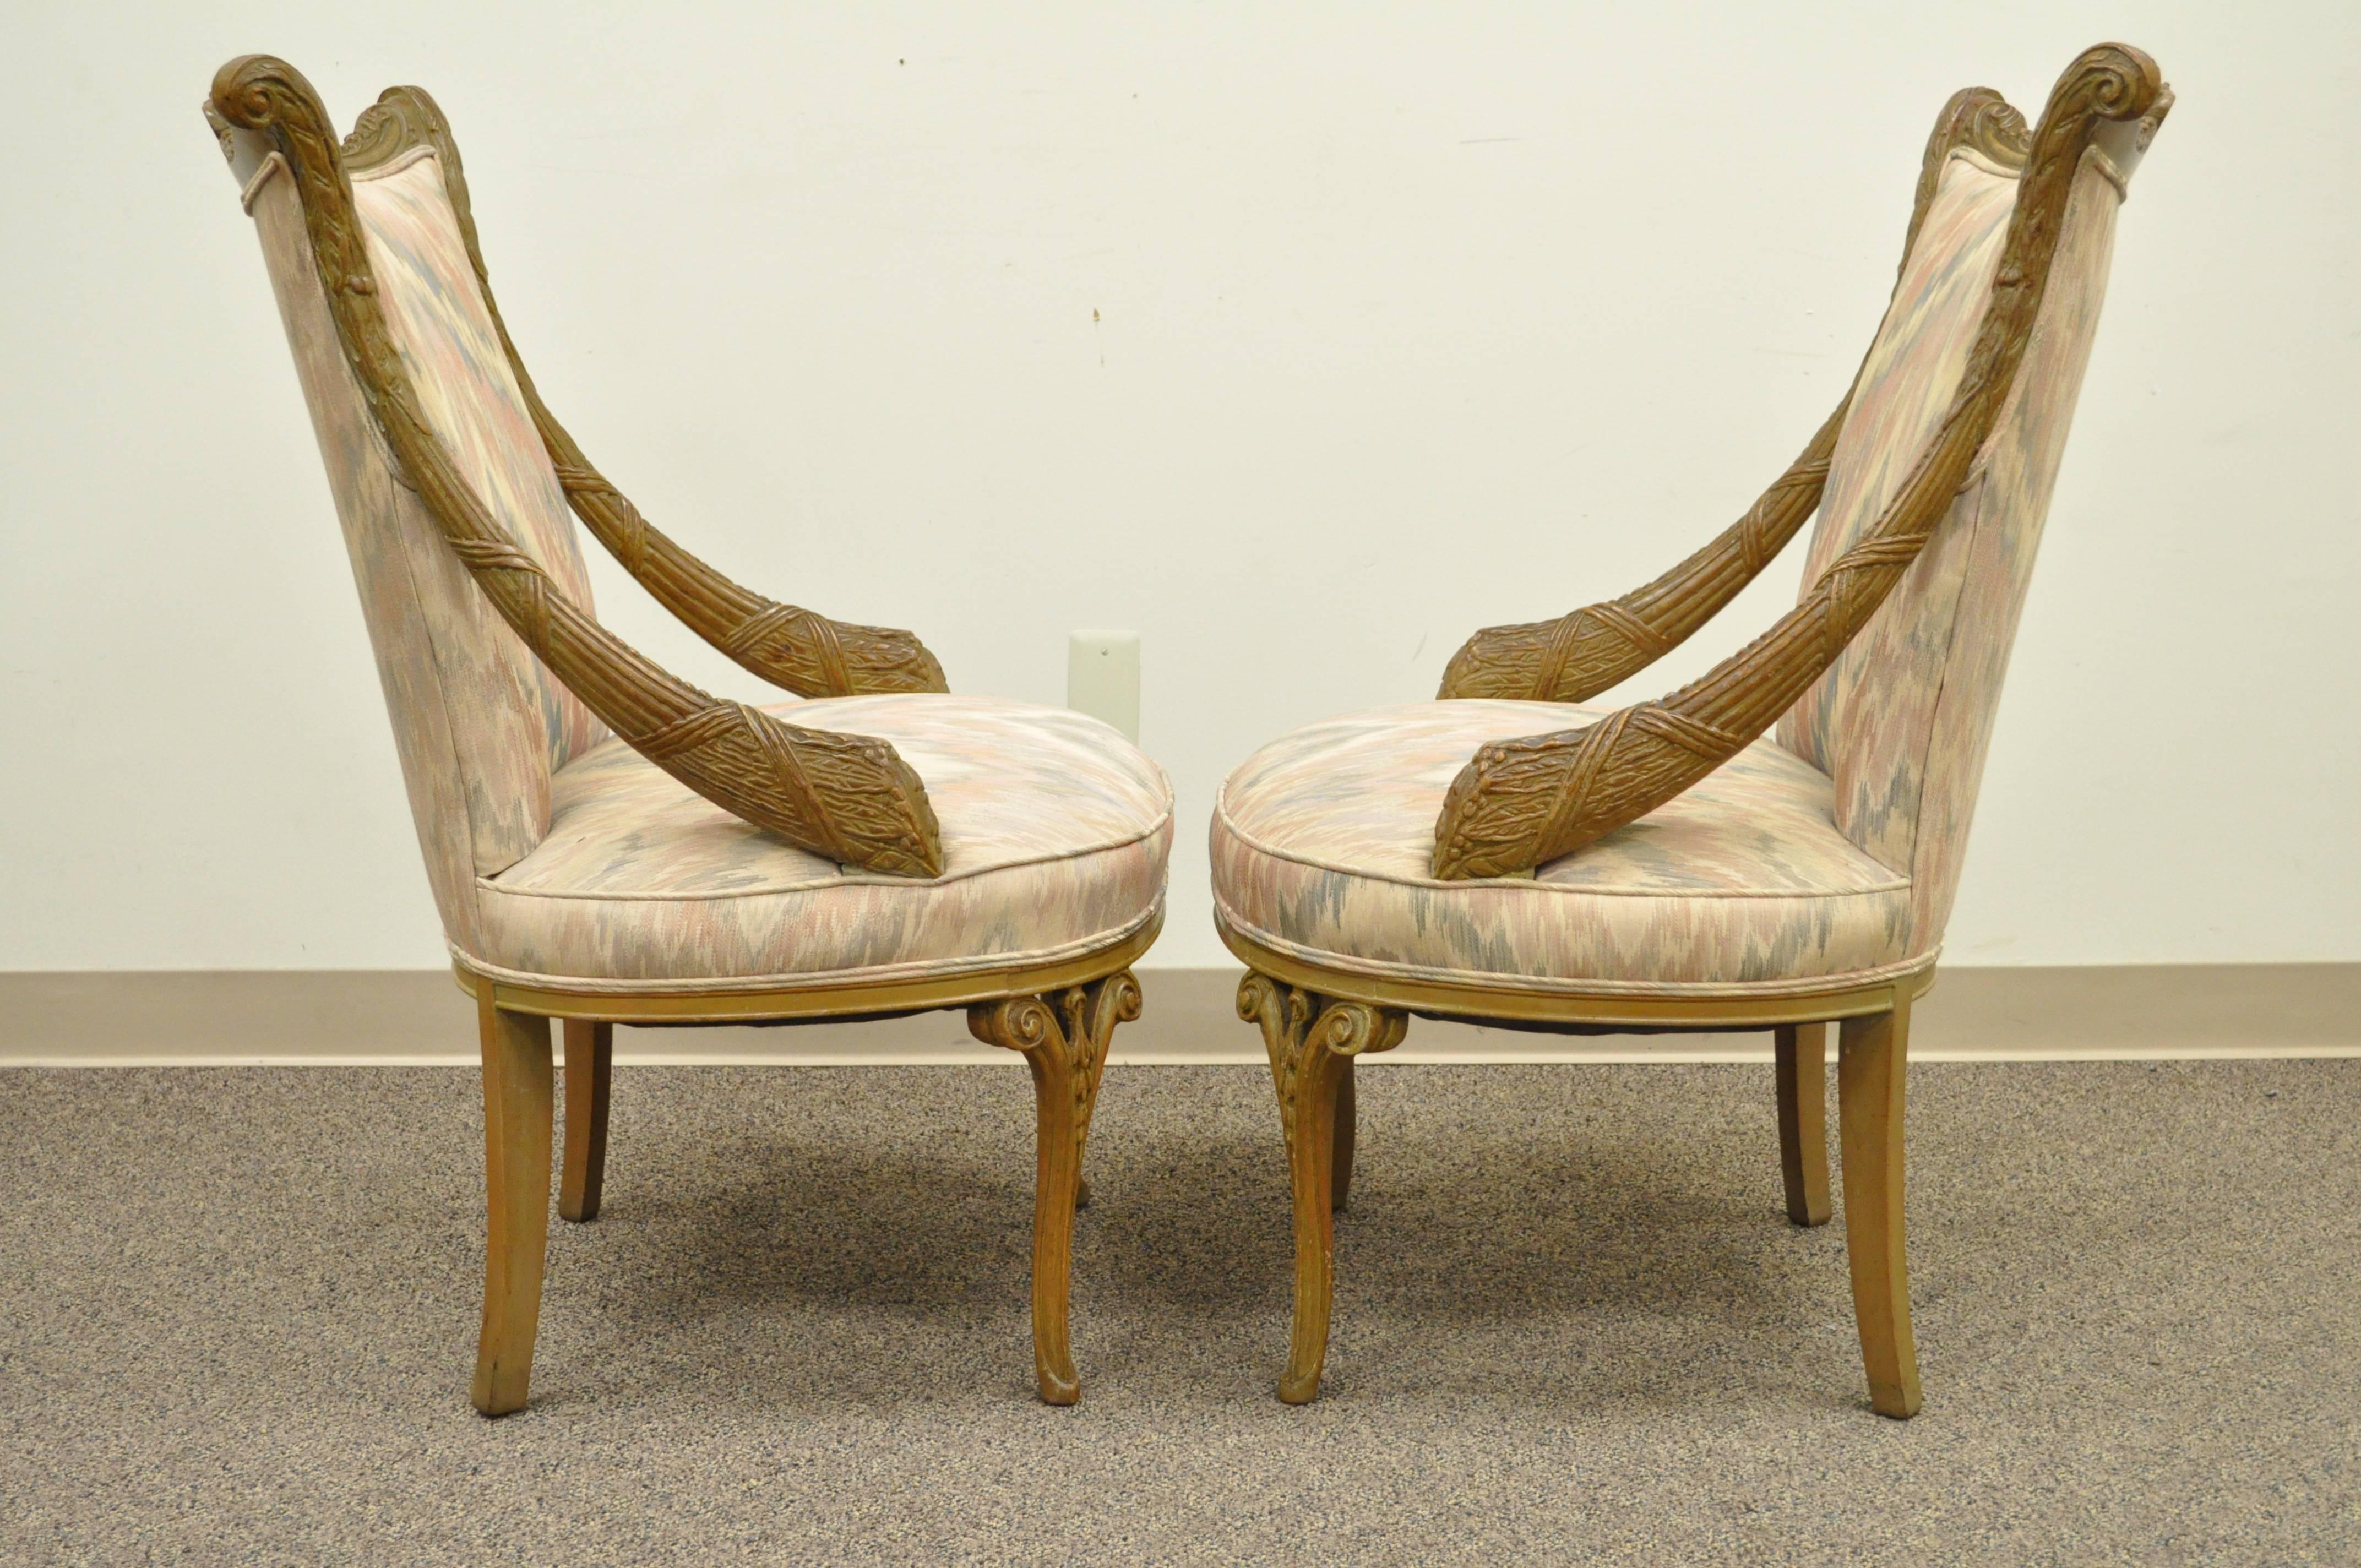 Great Pair of Vintage Hollywood Regency Carved Mahogany Parlor Chairs attributed to Grosfeld House. The pair featured sloping cornucopia designed hip rests, open carved legs, and drape and floral carved frames. The style works very well with many